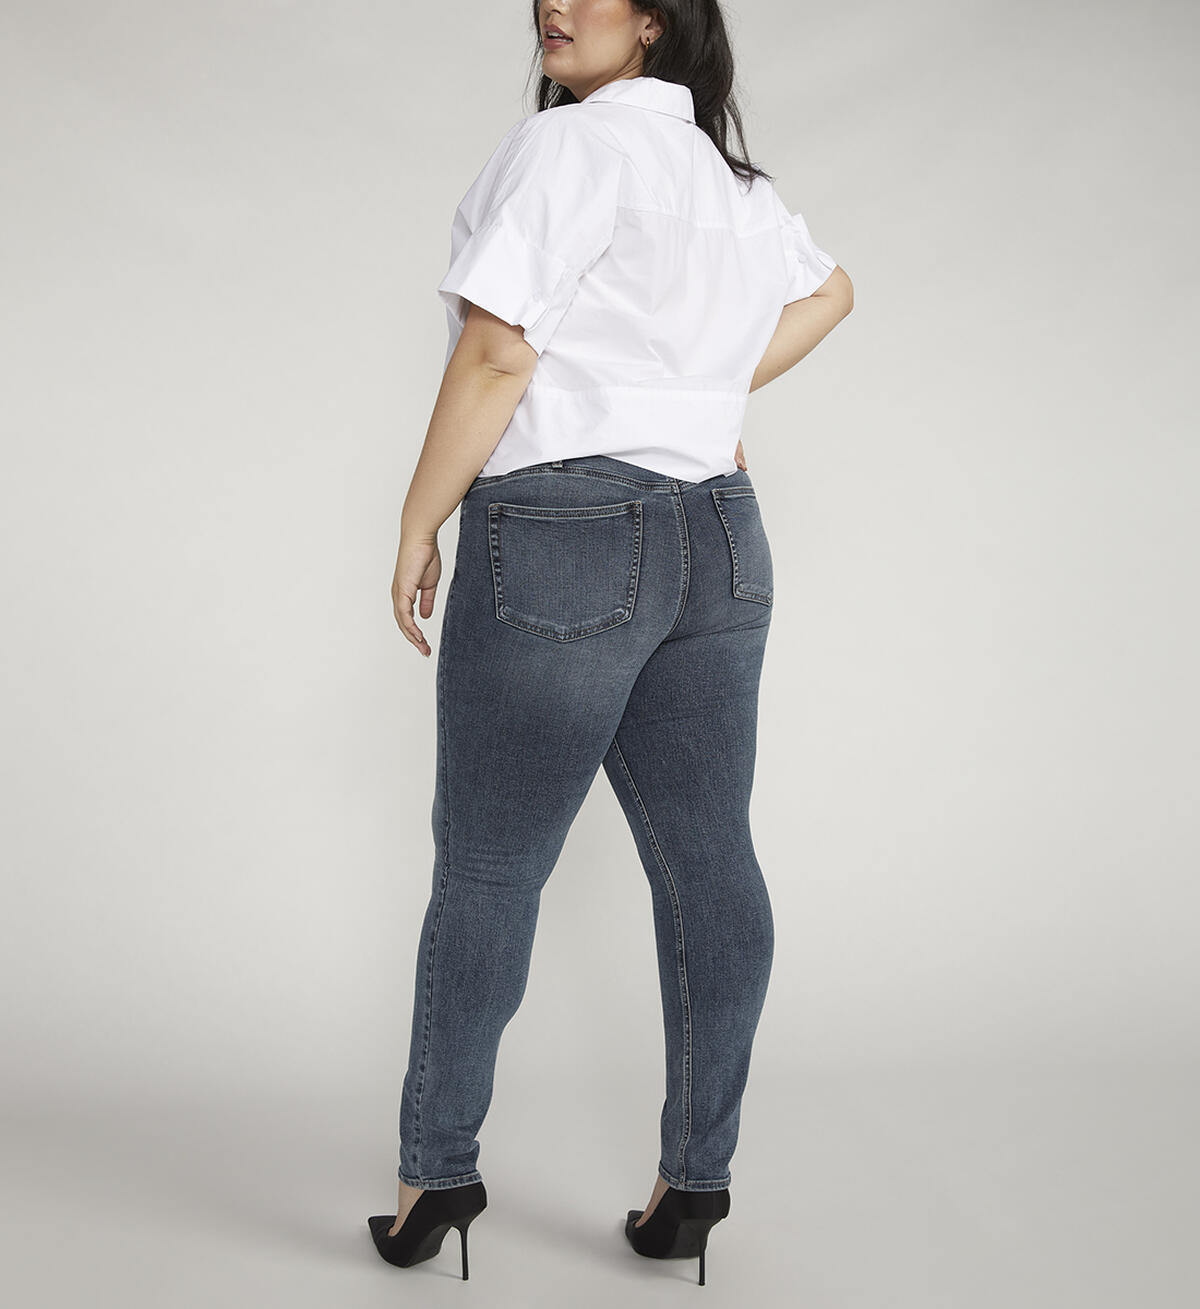 Most Wanted Mid Rise Straight Leg Jeans Plus Size, Indigo, hi-res image number 1